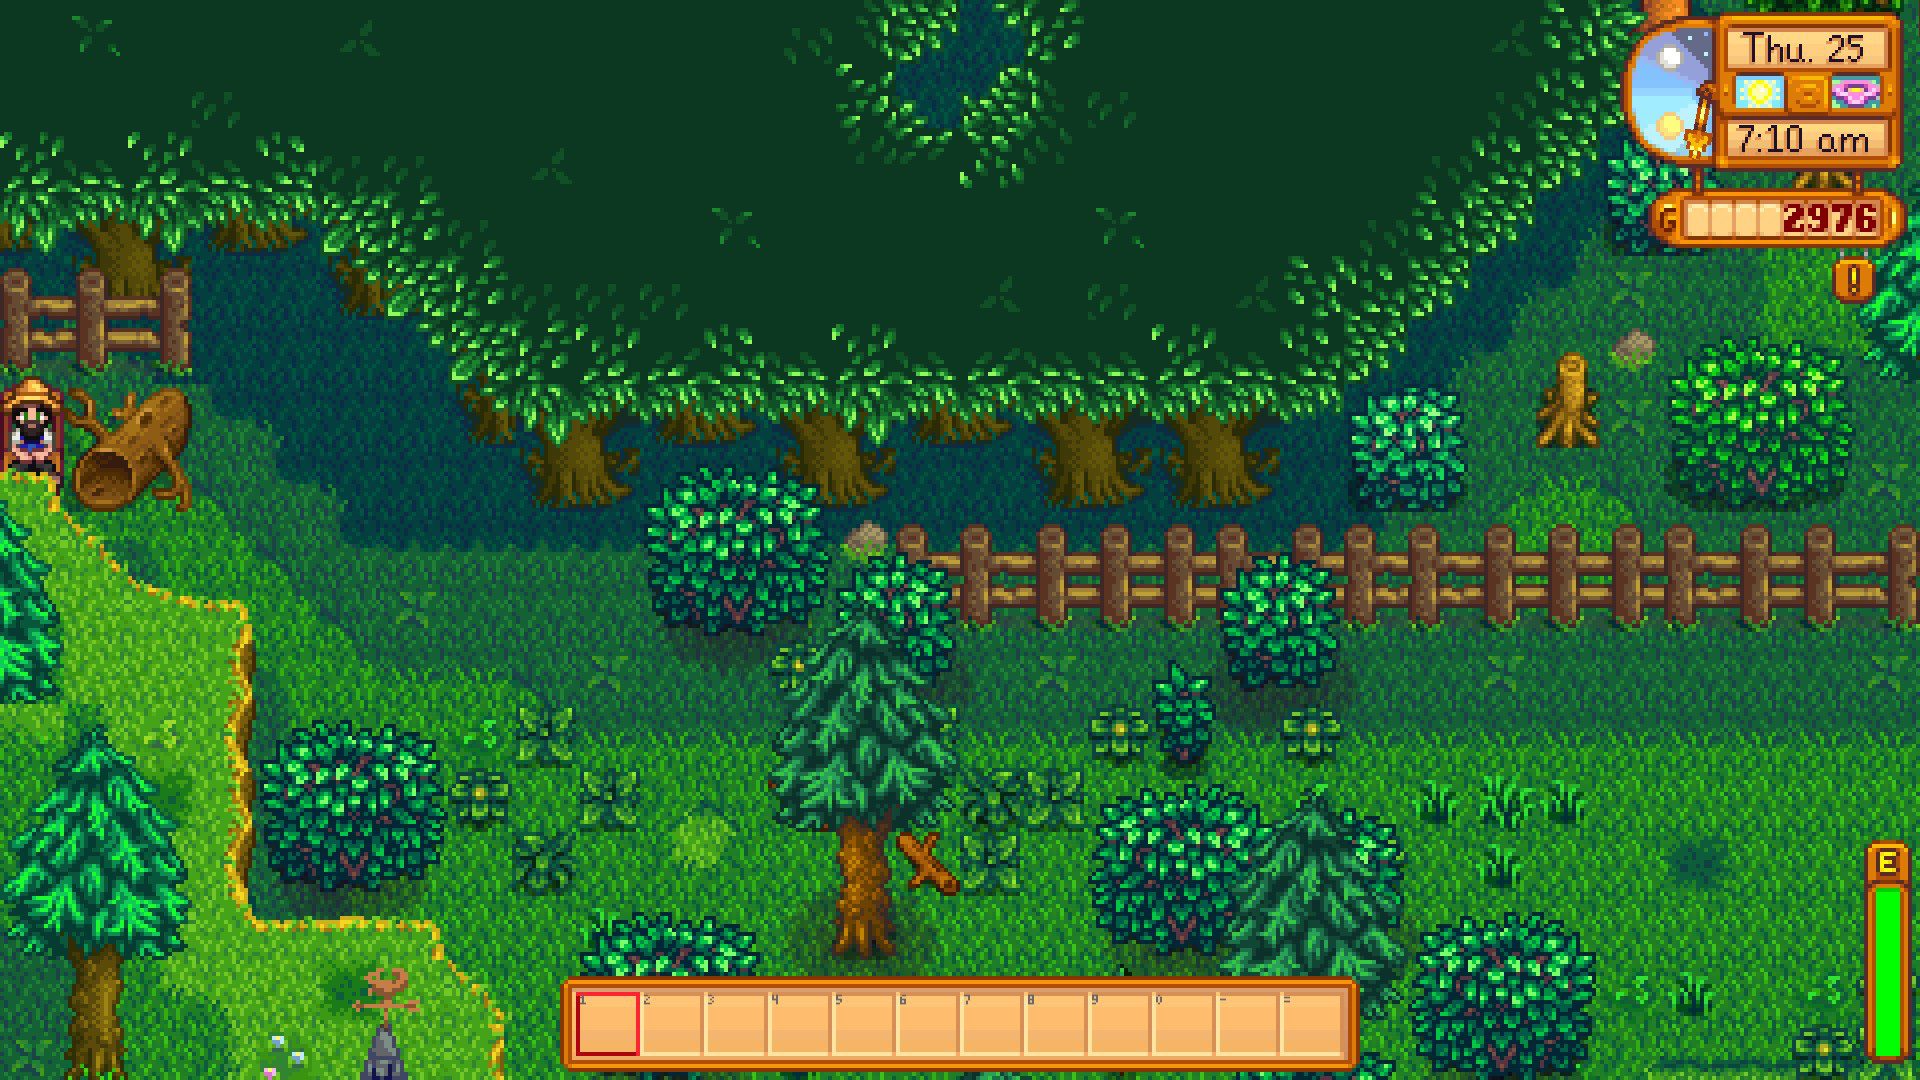 You can use a chair to skip past the log blocking the Secret Woods entrance